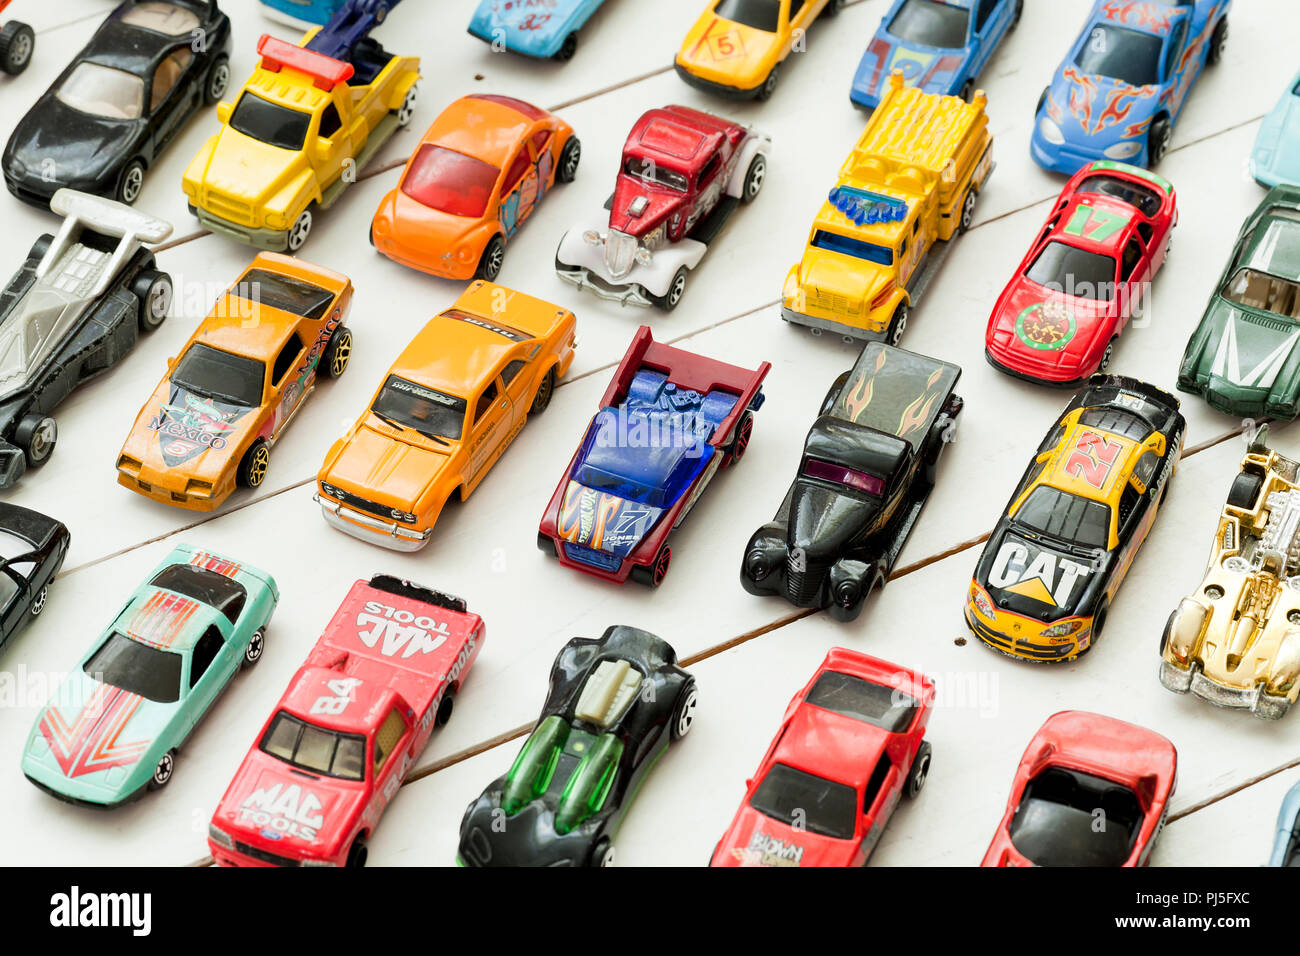 Vintage used Hot Wheels collection on table - USA Stock Photo